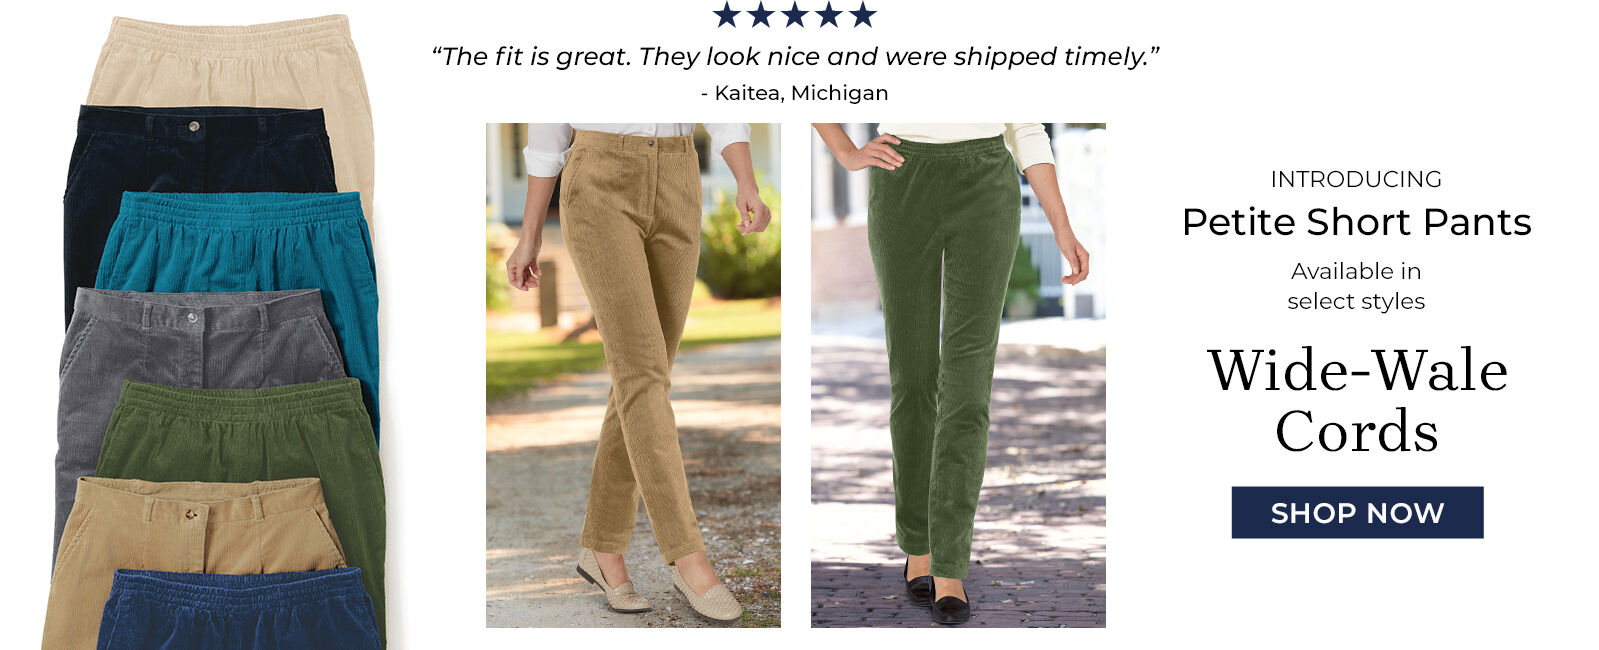 "I would buy this product again and again." -Judy, Tiverton RI introducing petite short pants available in select styles slimsation cords shop now